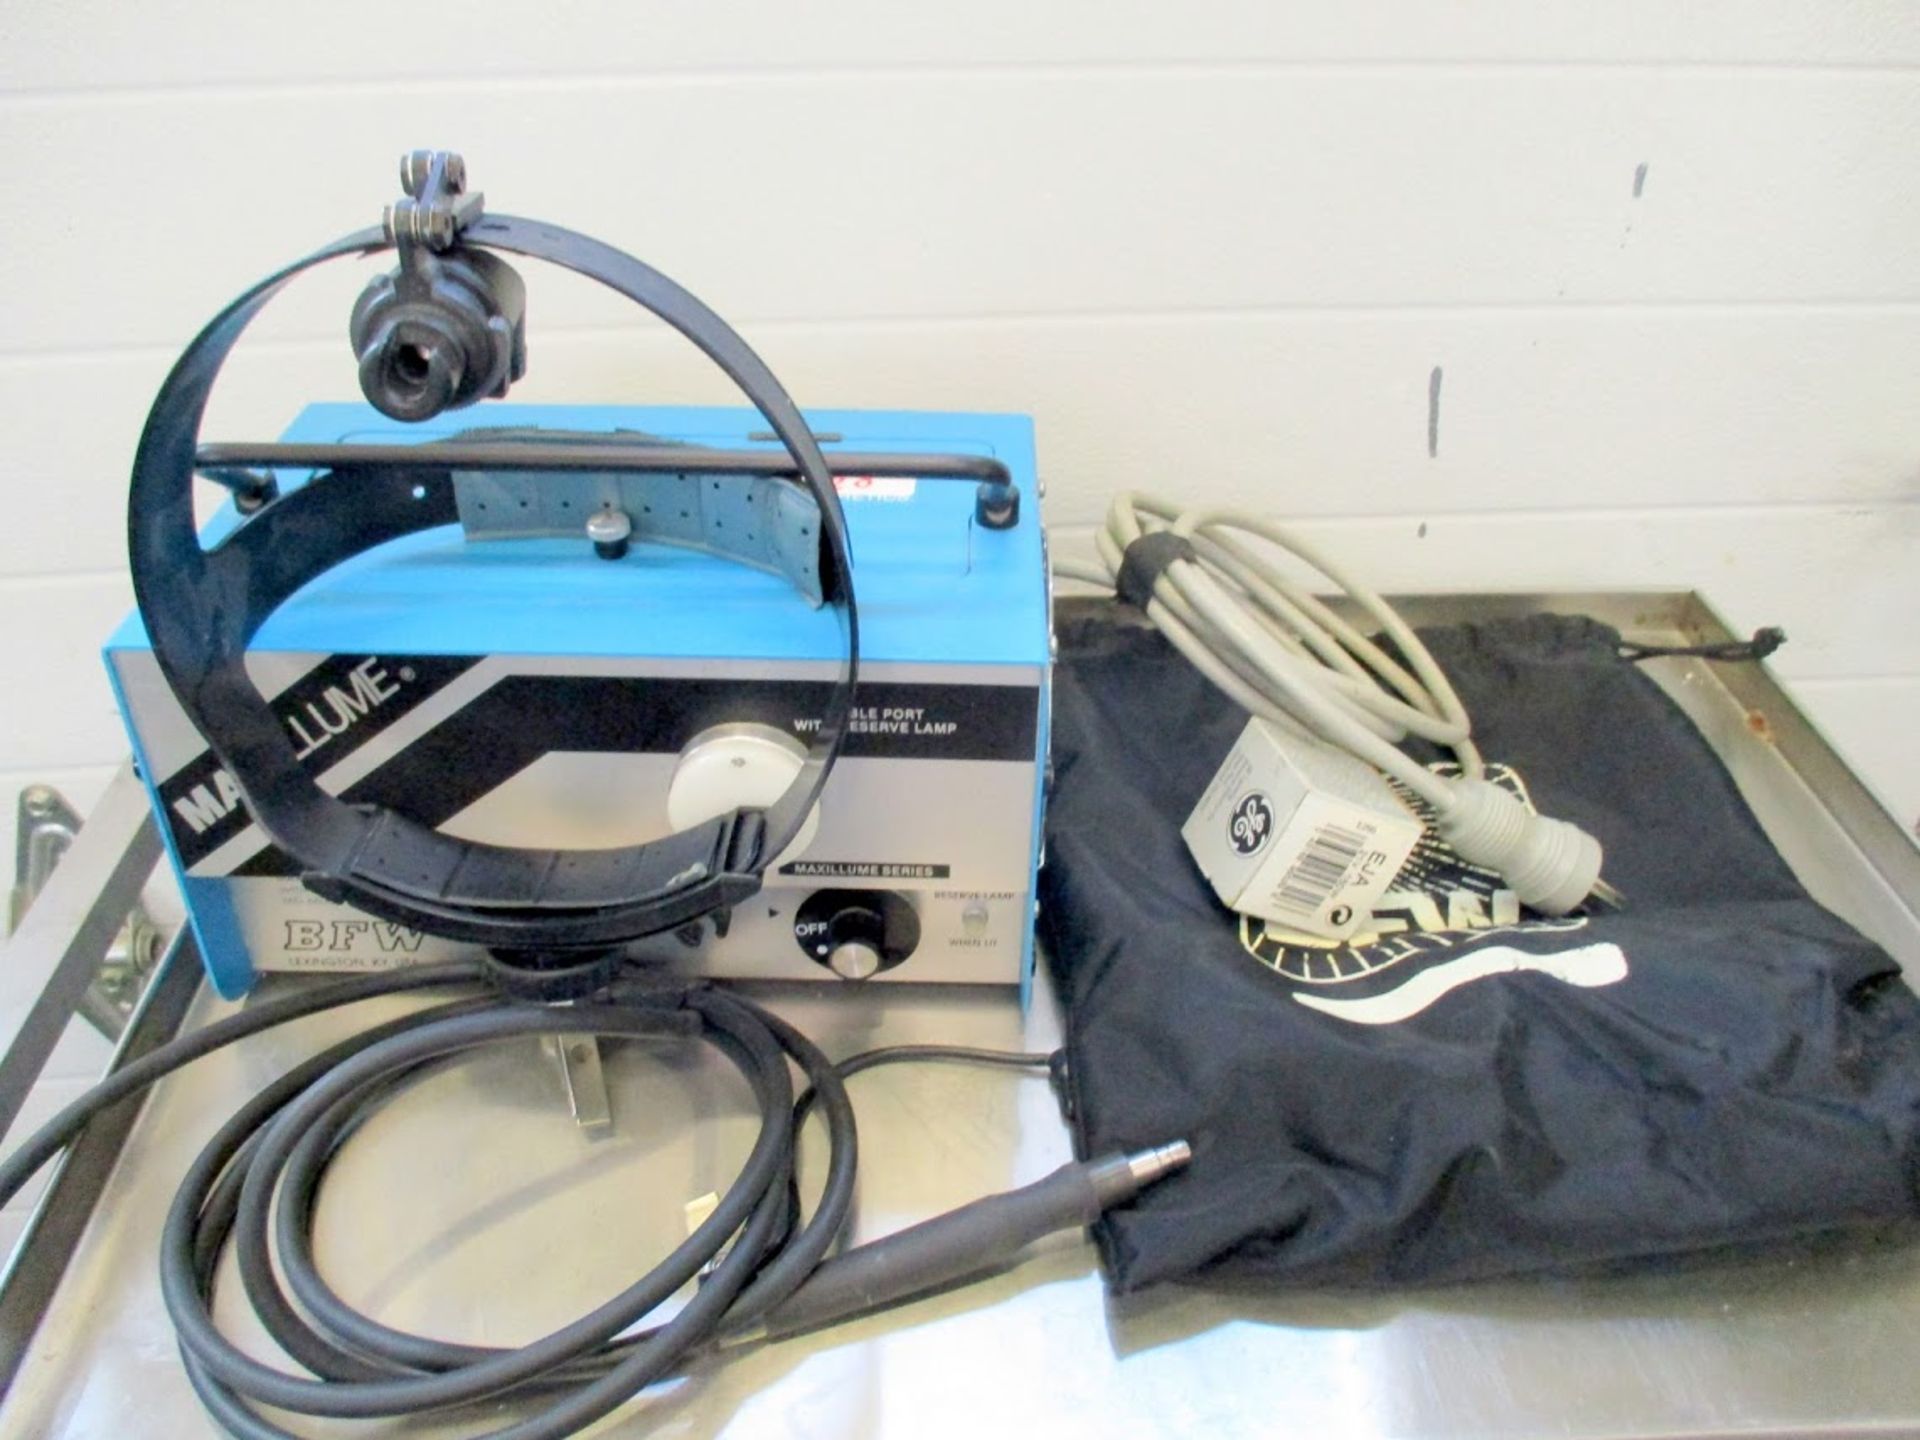 BFW 150-1 Light Source with headgear, handpiece, new bulb and carrying bag.